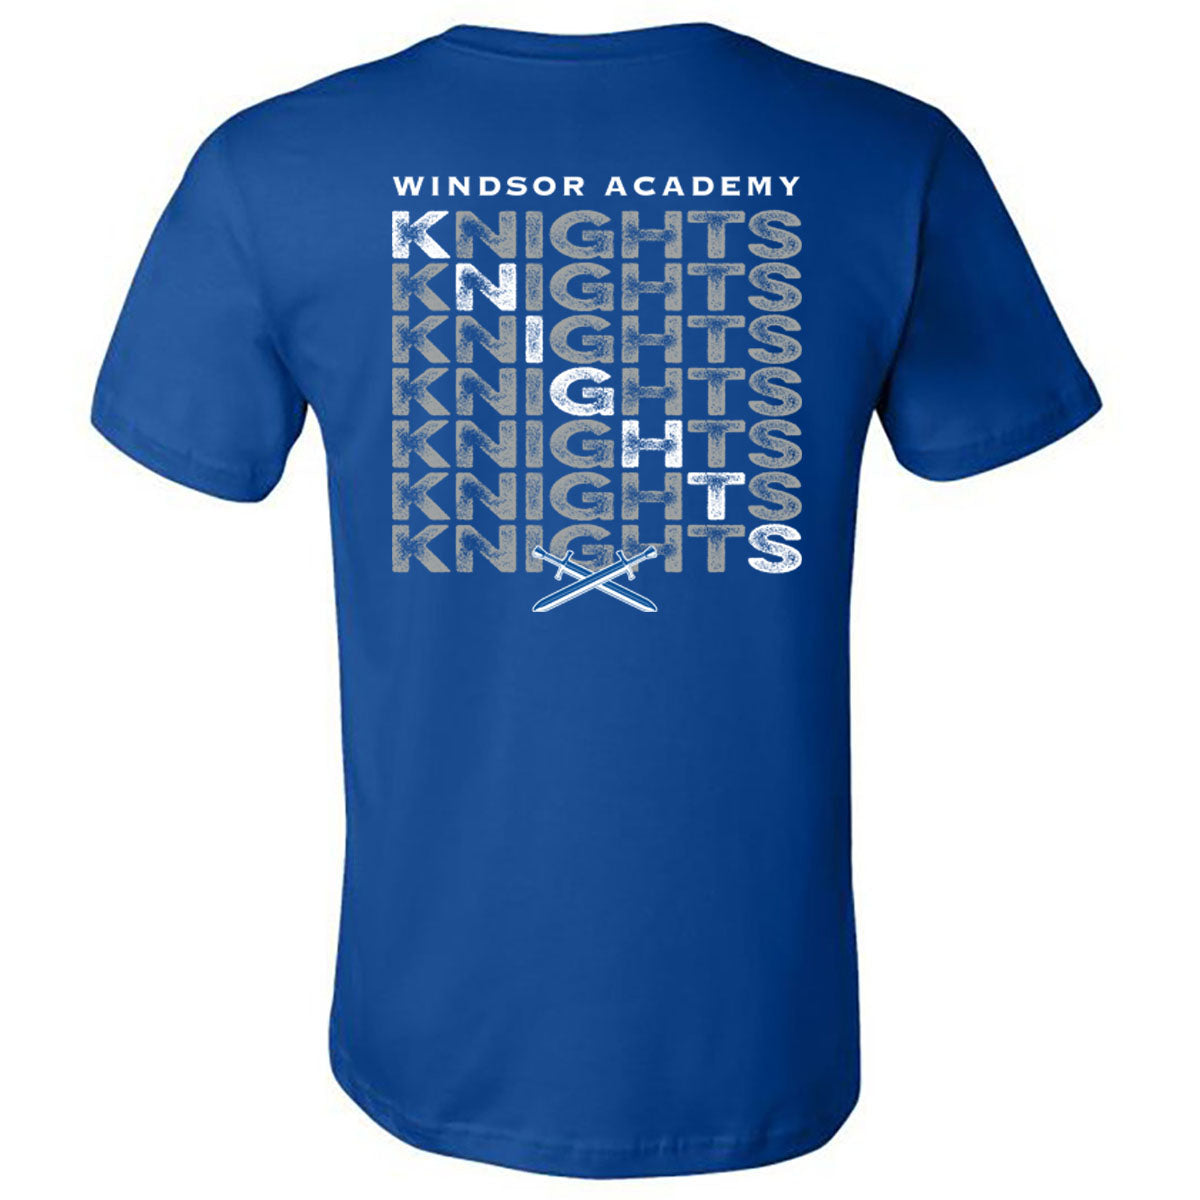 Windsor - Knights Knights Knights with Sword - Royal Short Sleeves Tee - Southern Grace Creations